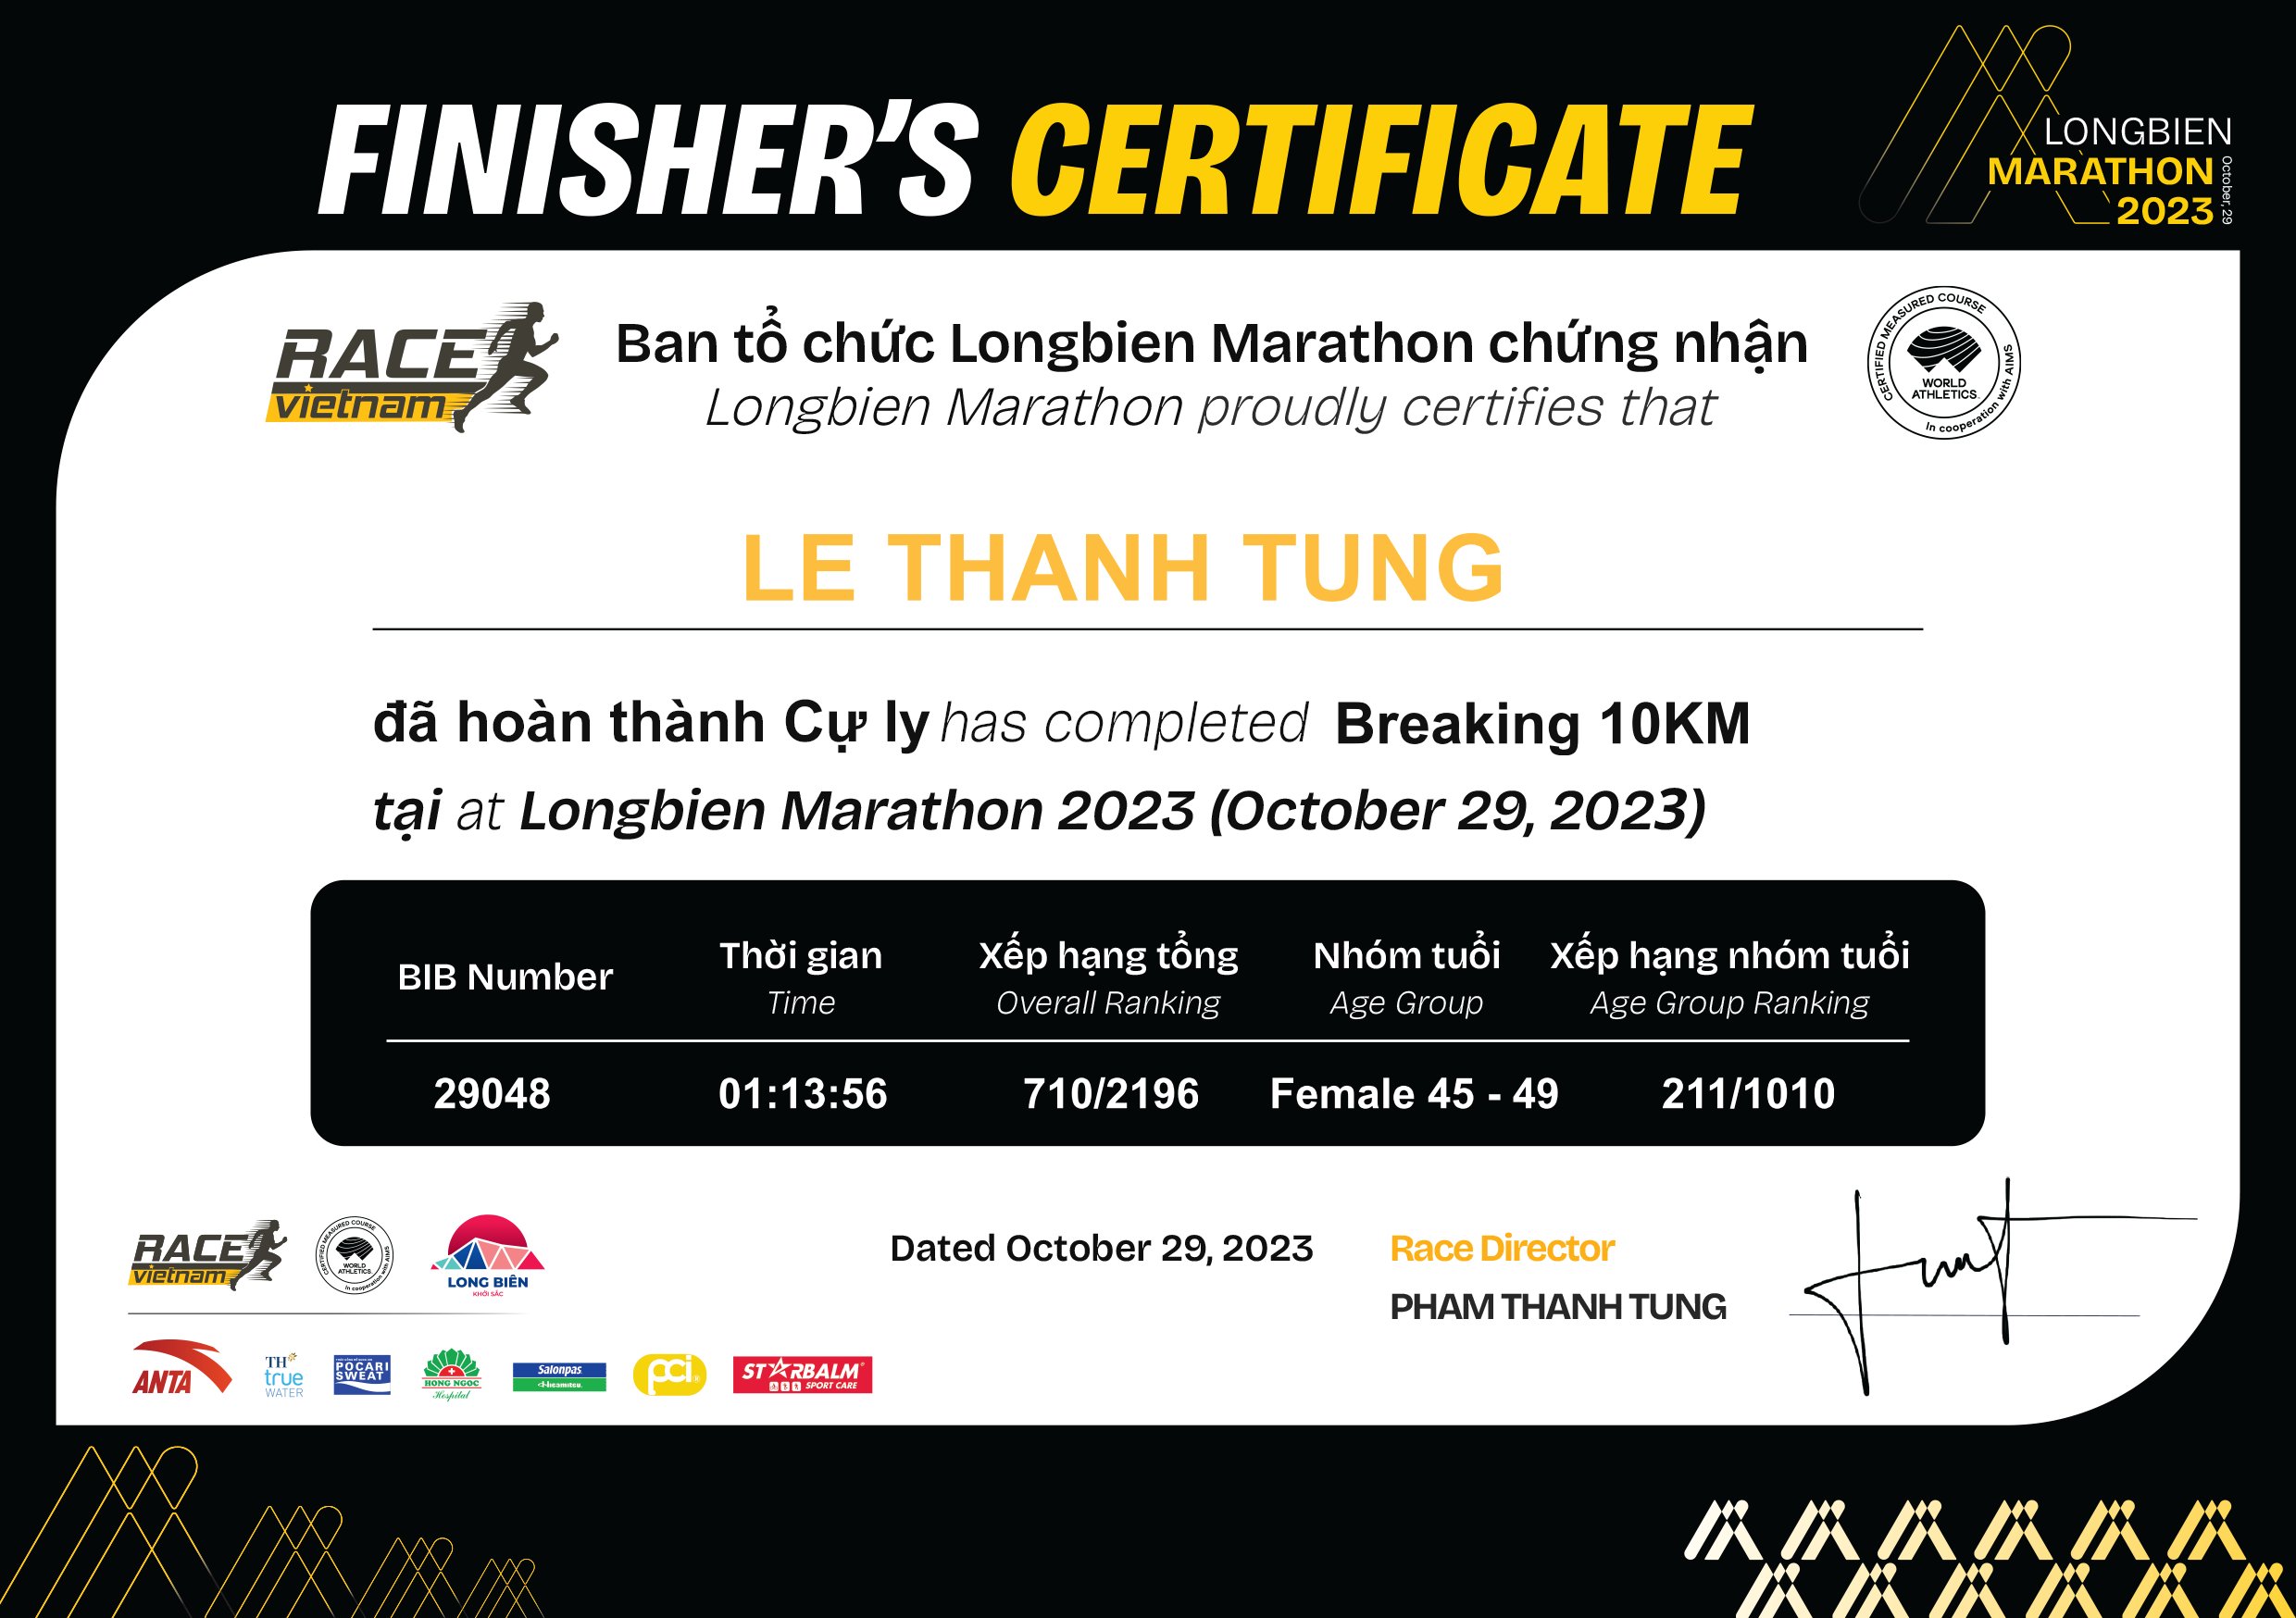 29048 - Le Thanh Tung